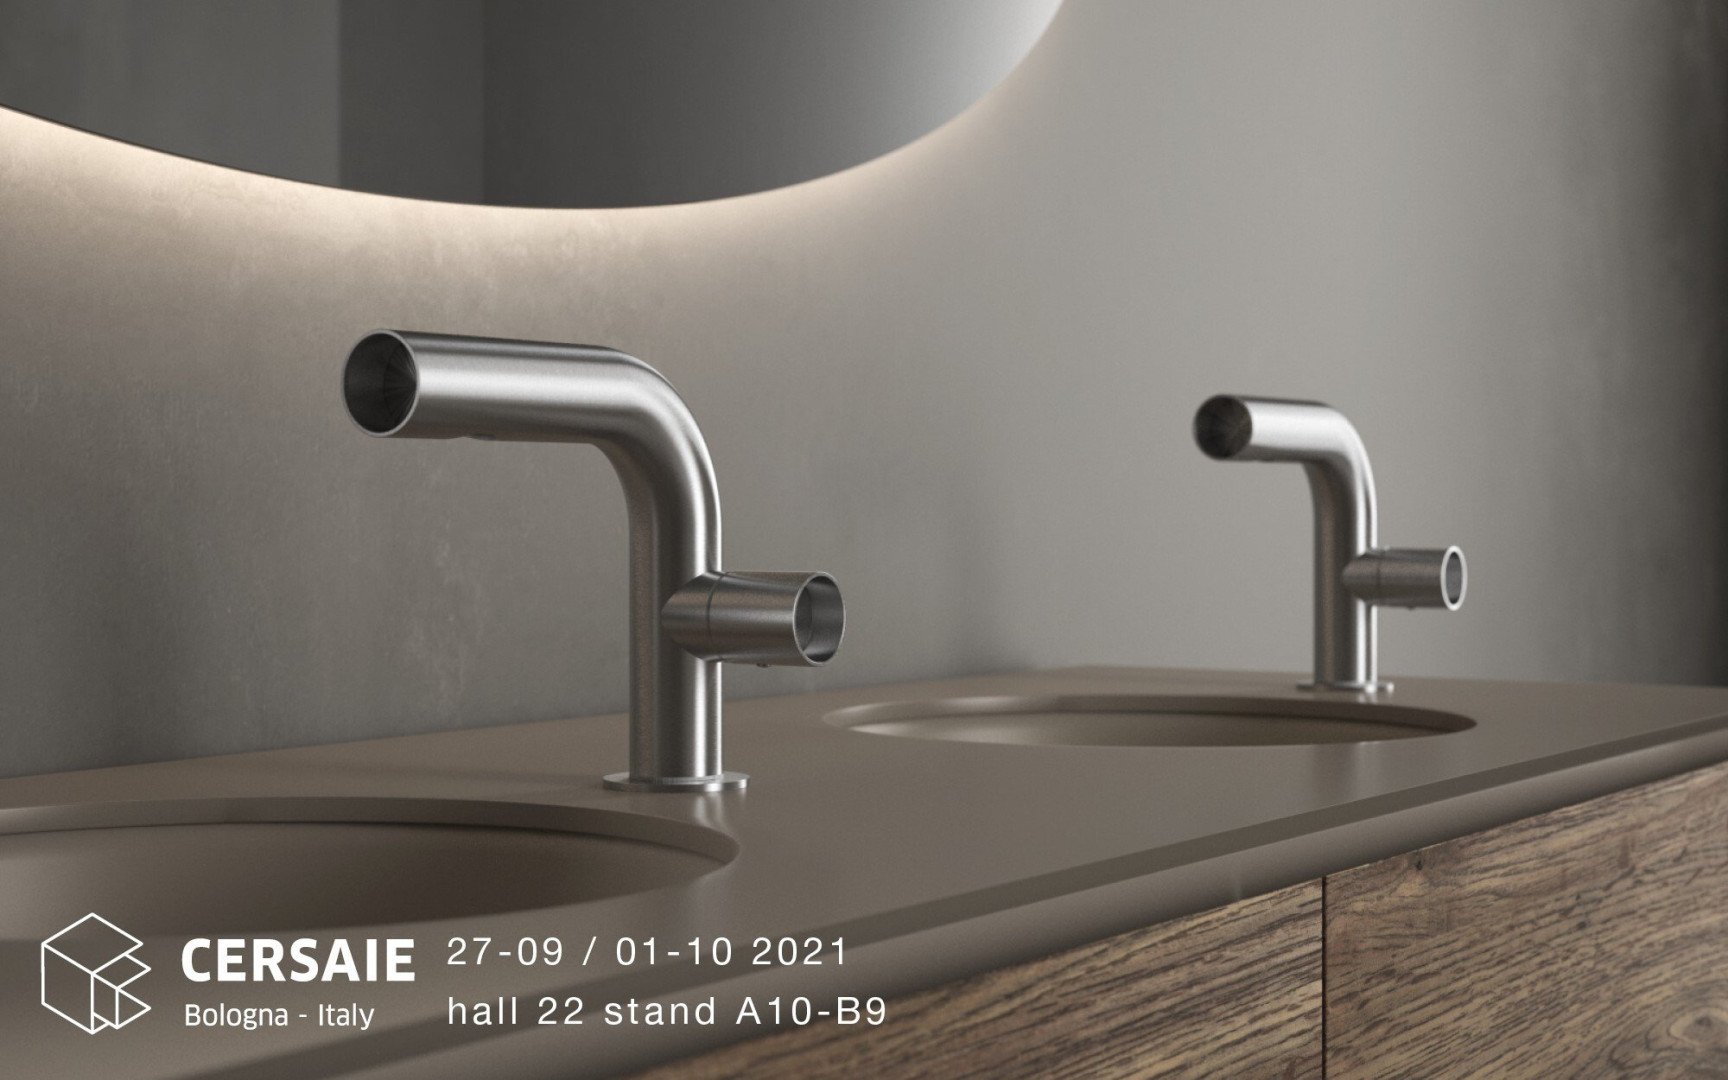 Rubinetterie Treemme at Cersaie 2021: Innovation for water